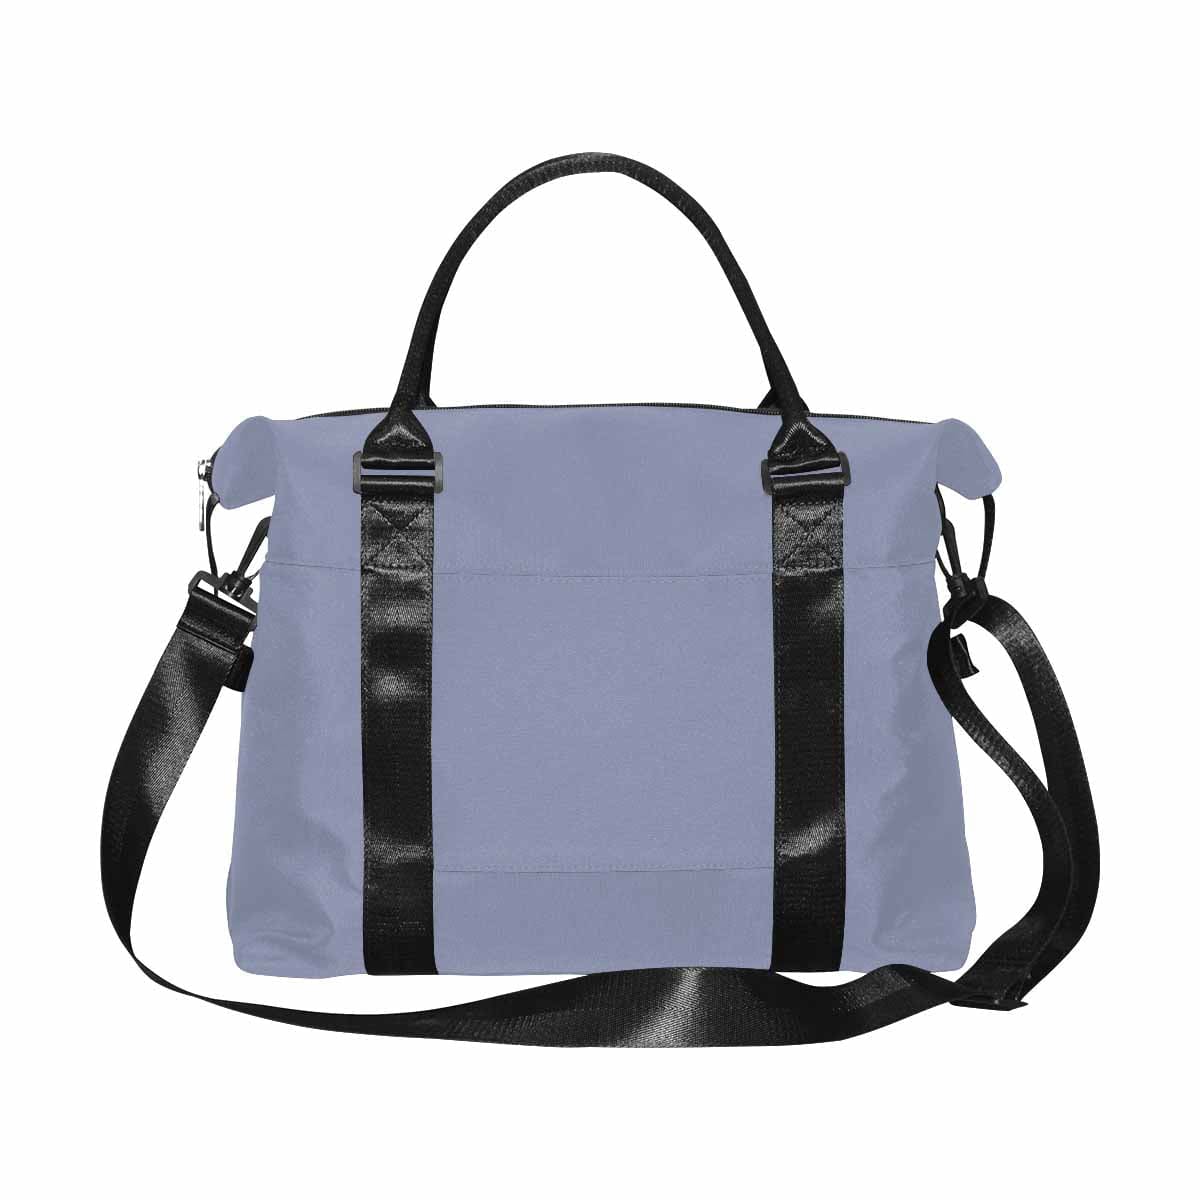 Cool Gray Duffel Bag Large Travel Carry On - Bags | Duffel Bags